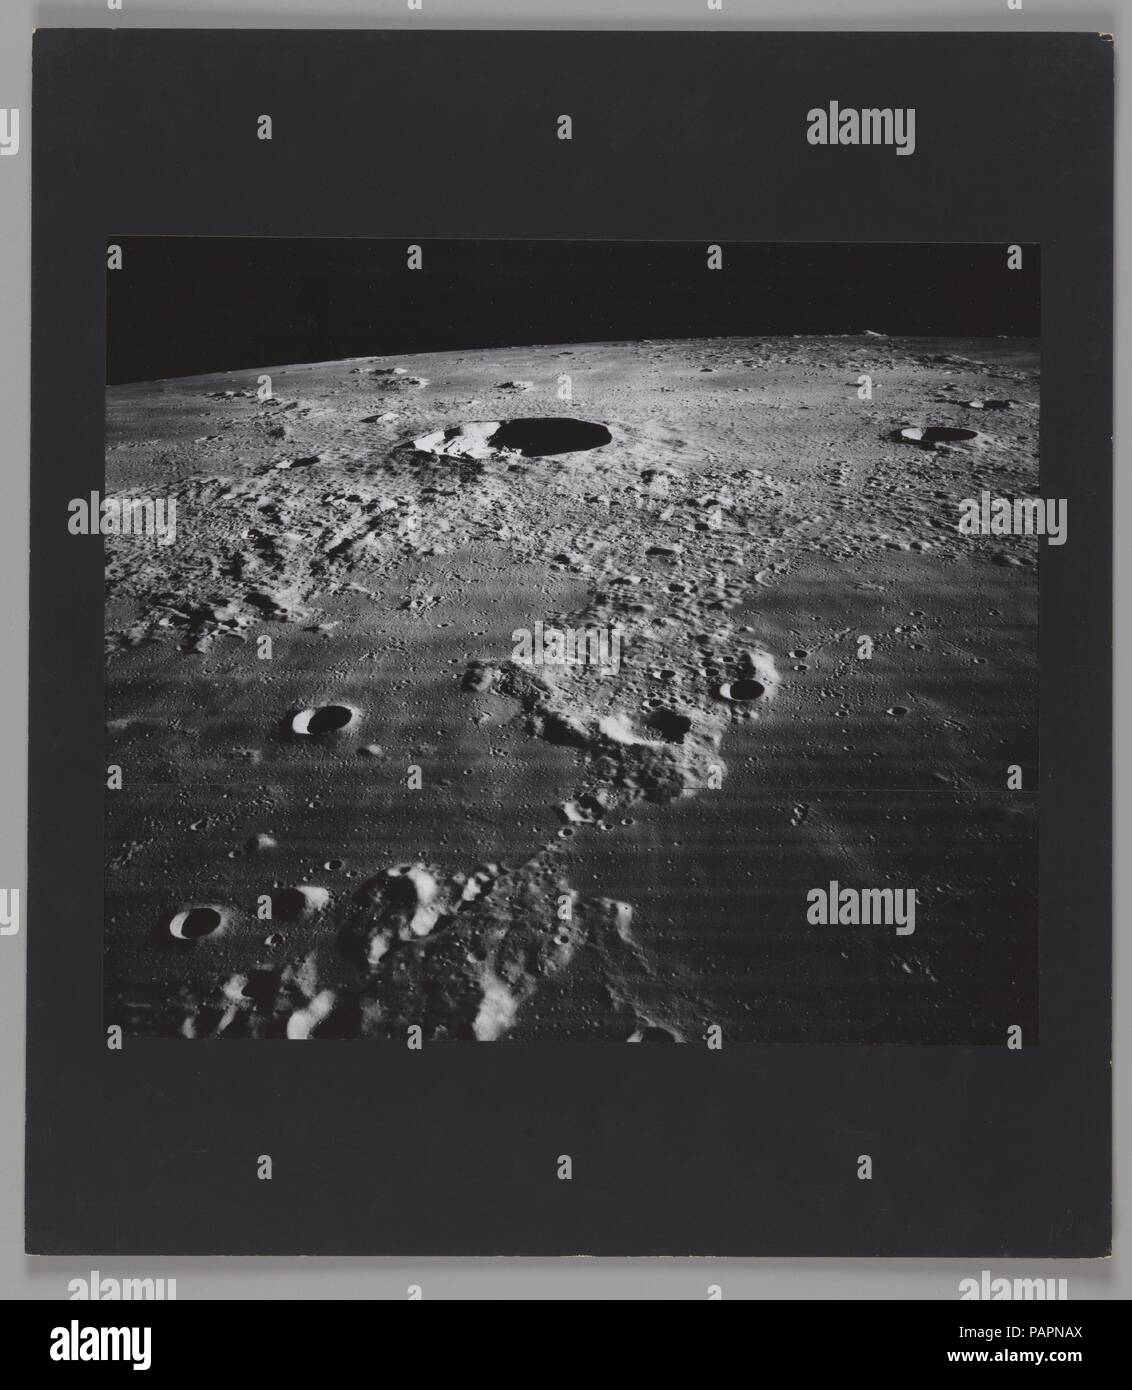 The Moon - Crater Kepler and Vicinity. Artist: National Aeronautics and Space Administration (NASA). Dimensions: Image: 11 7/8 × 13 13/16 in. (30.2 × 35.1 cm)  Mount: 16 × 18 in. (40.6 × 45.7 cm). Printer: Eastman Kodak Co. (American). Date: 1967.  This photograph was made as part of the Lunar Orbiter program, a series of five unmanned spacecraft launched into orbit around the Moon in 1966 and 1967. Each spacecraft was equipped with a sophisticated imaging system provided by Eastman Kodak, which consisted of a dual-lens camera, film processing and handling units, and a readout scanner for tran Stock Photo